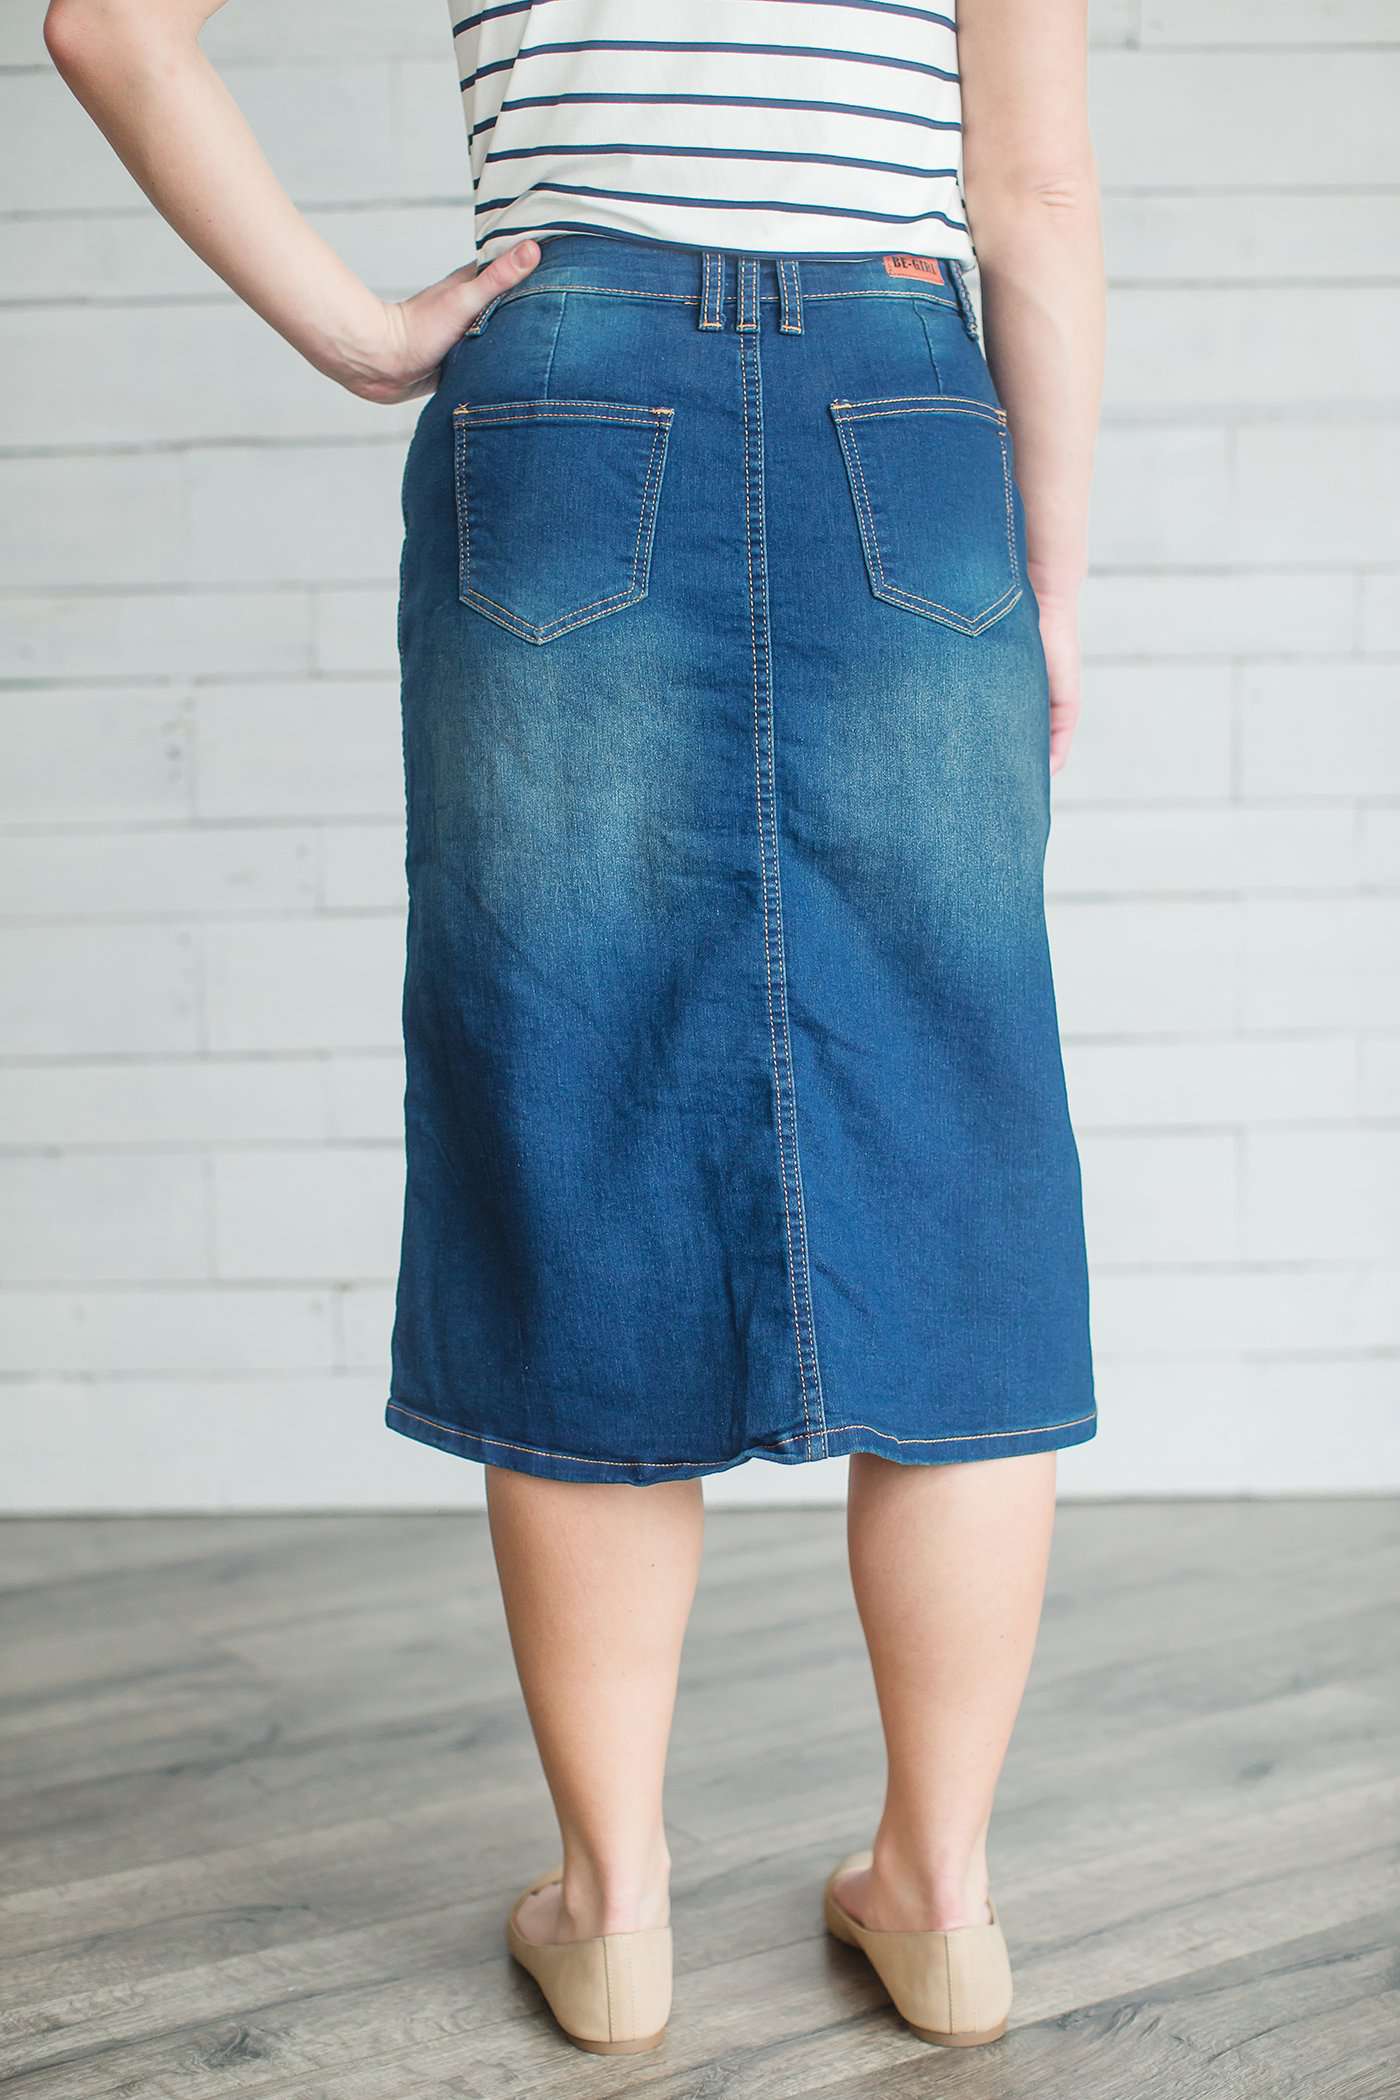 Modest women's denim midi skirt. Four buttons down the front, also pockets front and back.